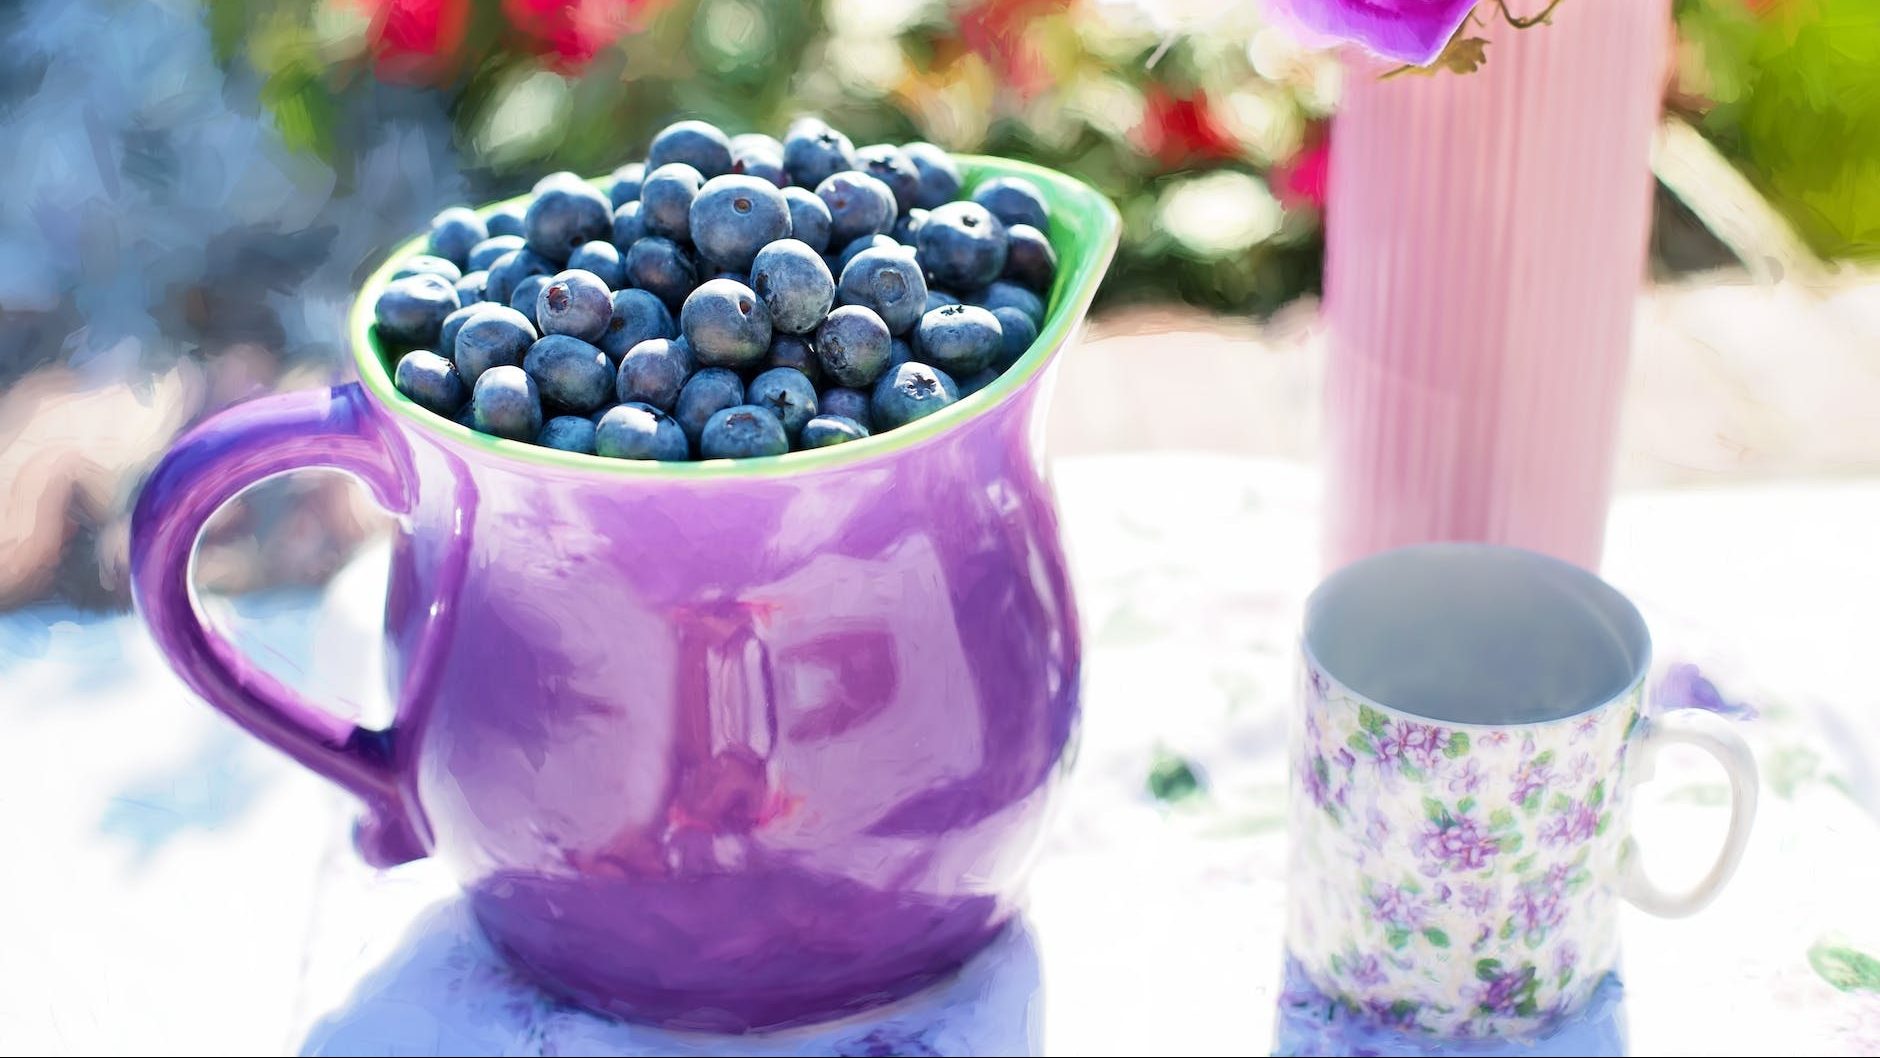 black berries on purple container beside white and purple floral mug